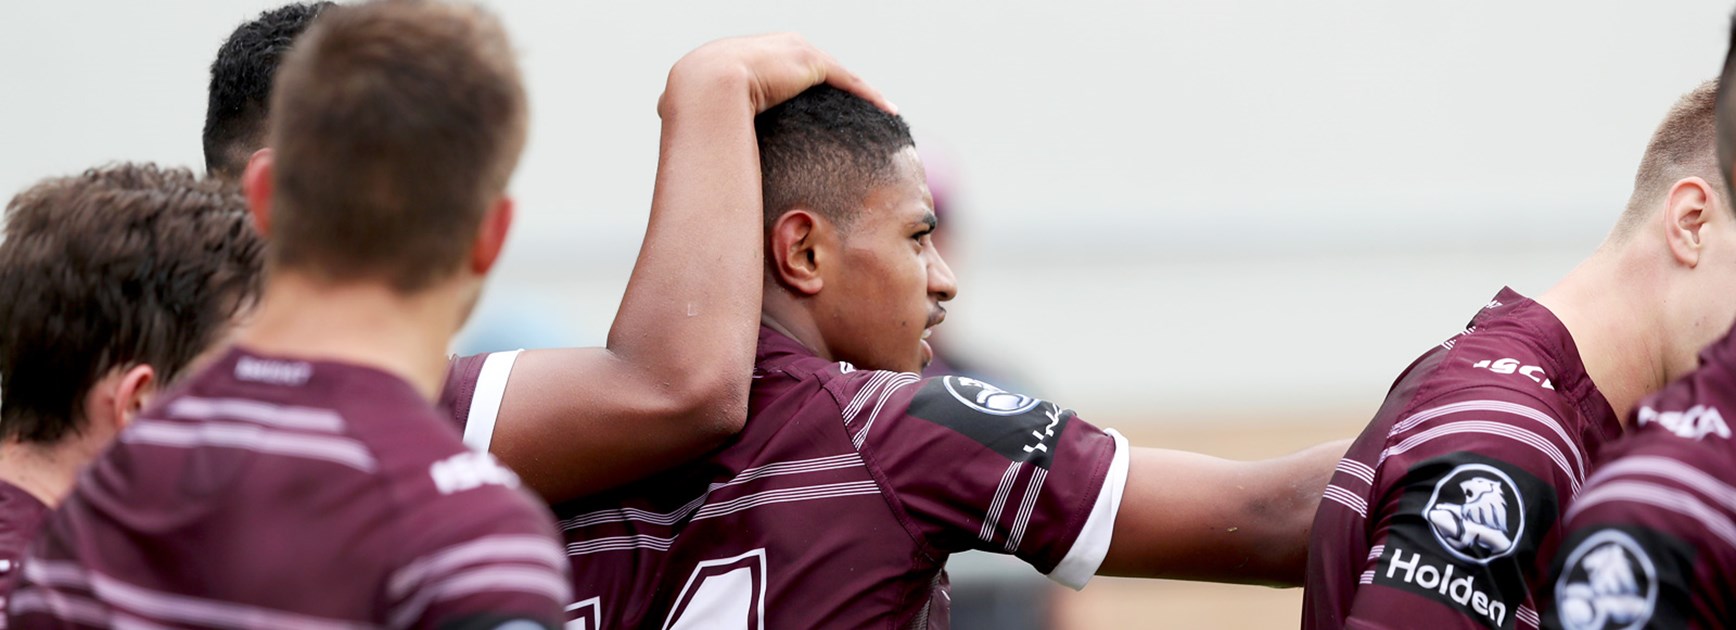 Sea Eagles stun the Sharks in NYC boilover